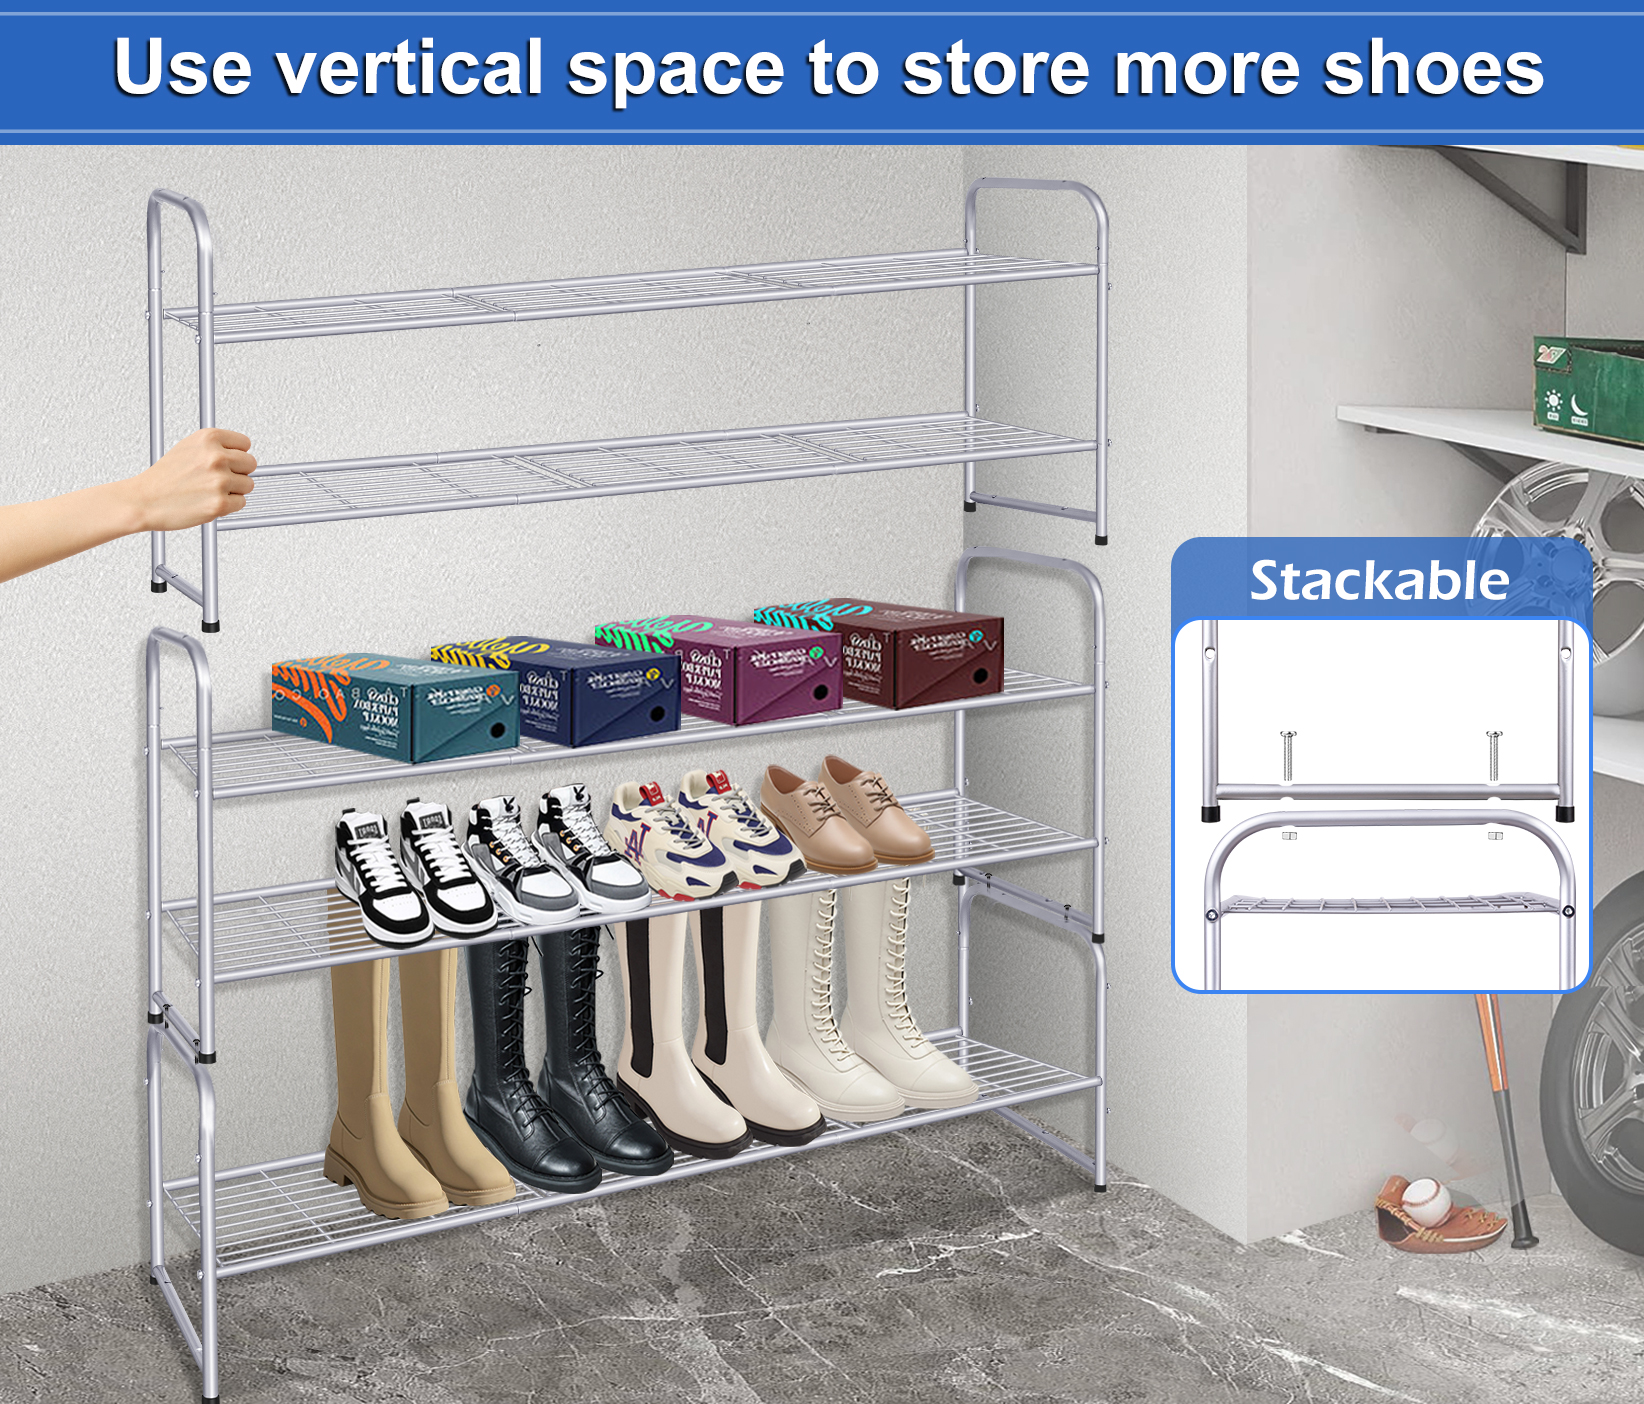  KEETDY Hanging Shoe Organizer to Store 10 Pairs Shoes